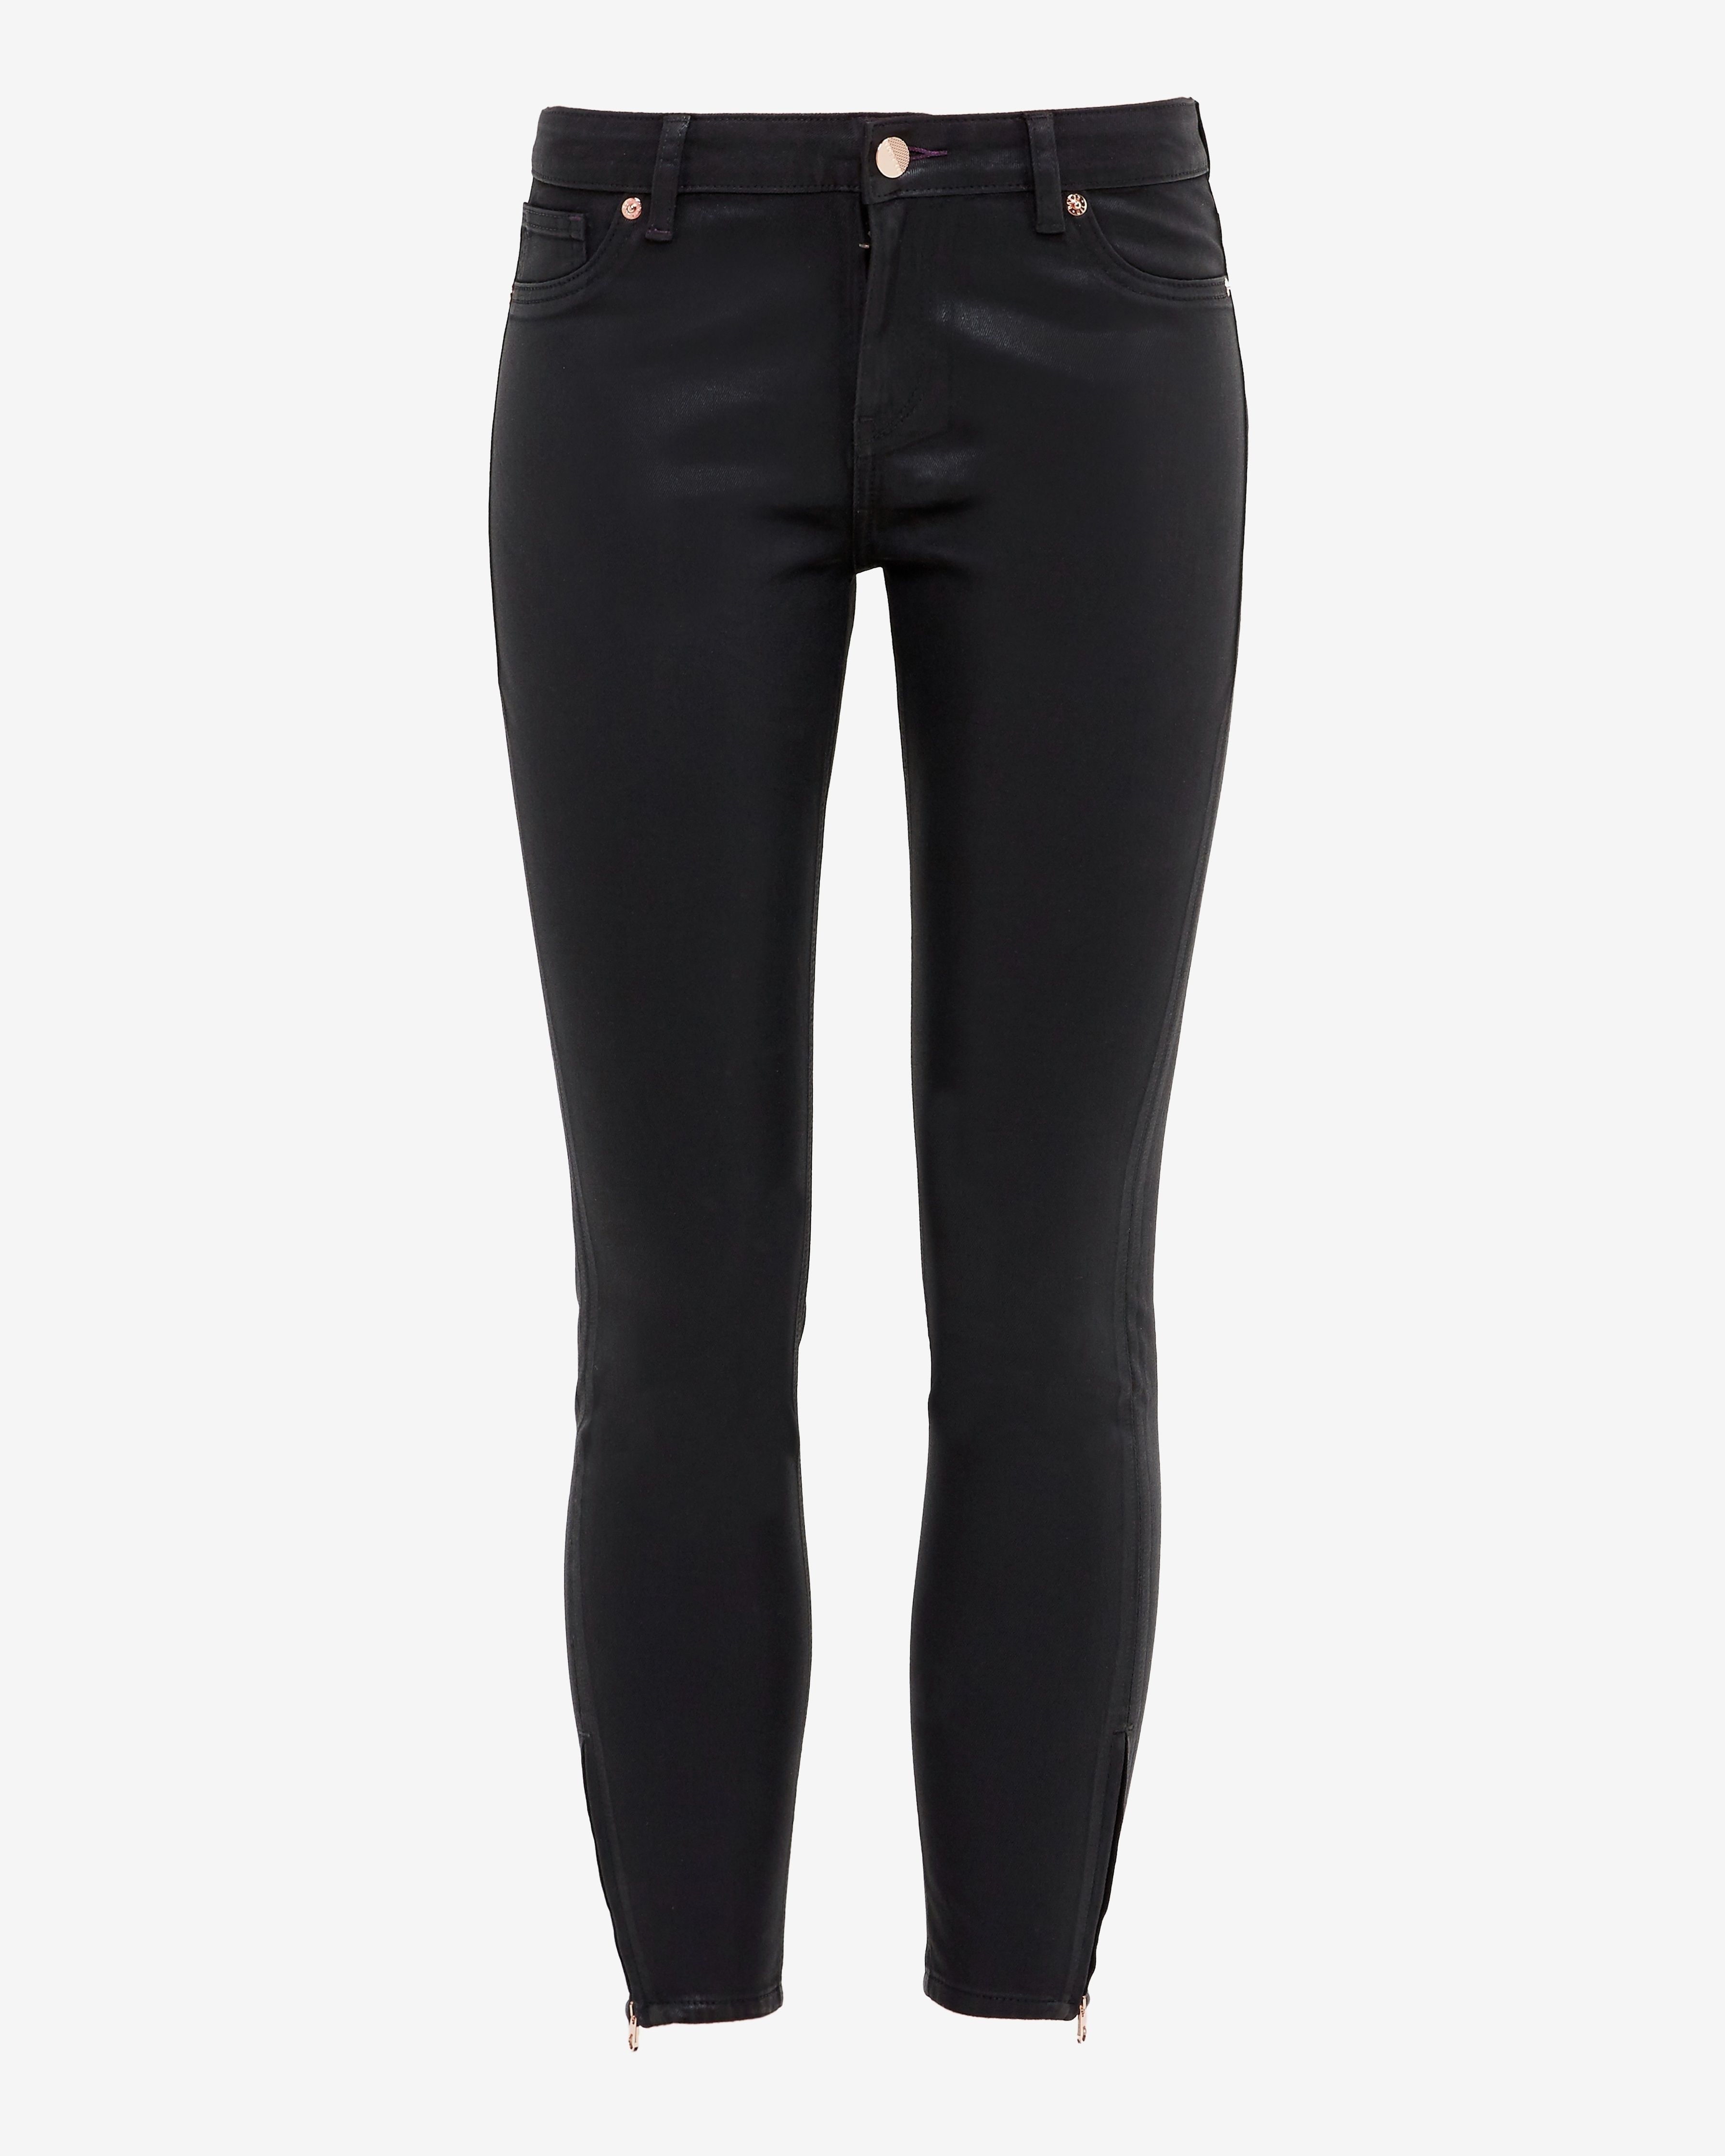 Ted Baker Annnas Wax Finish Skinny Jeans, Black